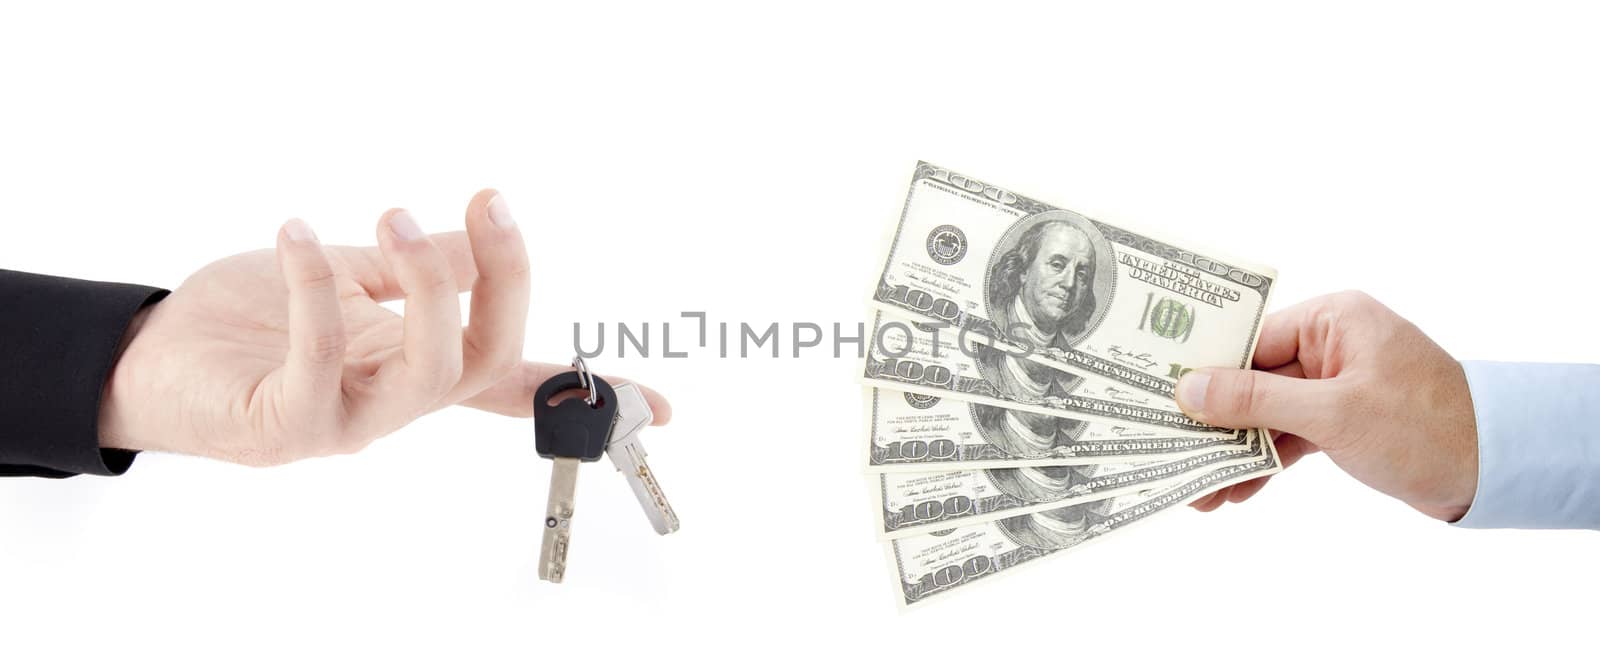 hands holdind money and car keys by shutswis